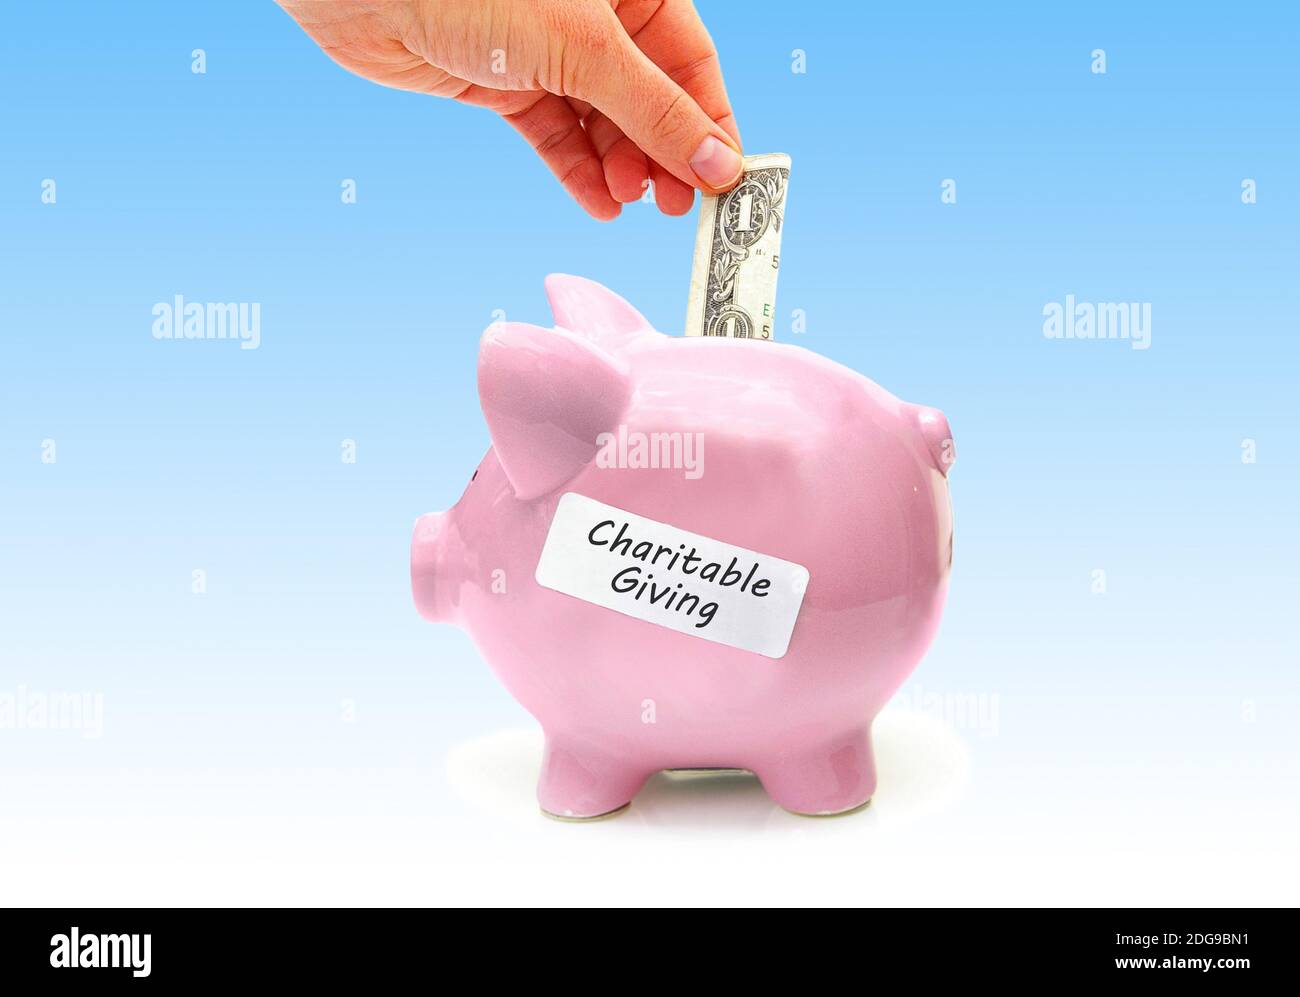 Charitable Giving concept Stock Photo